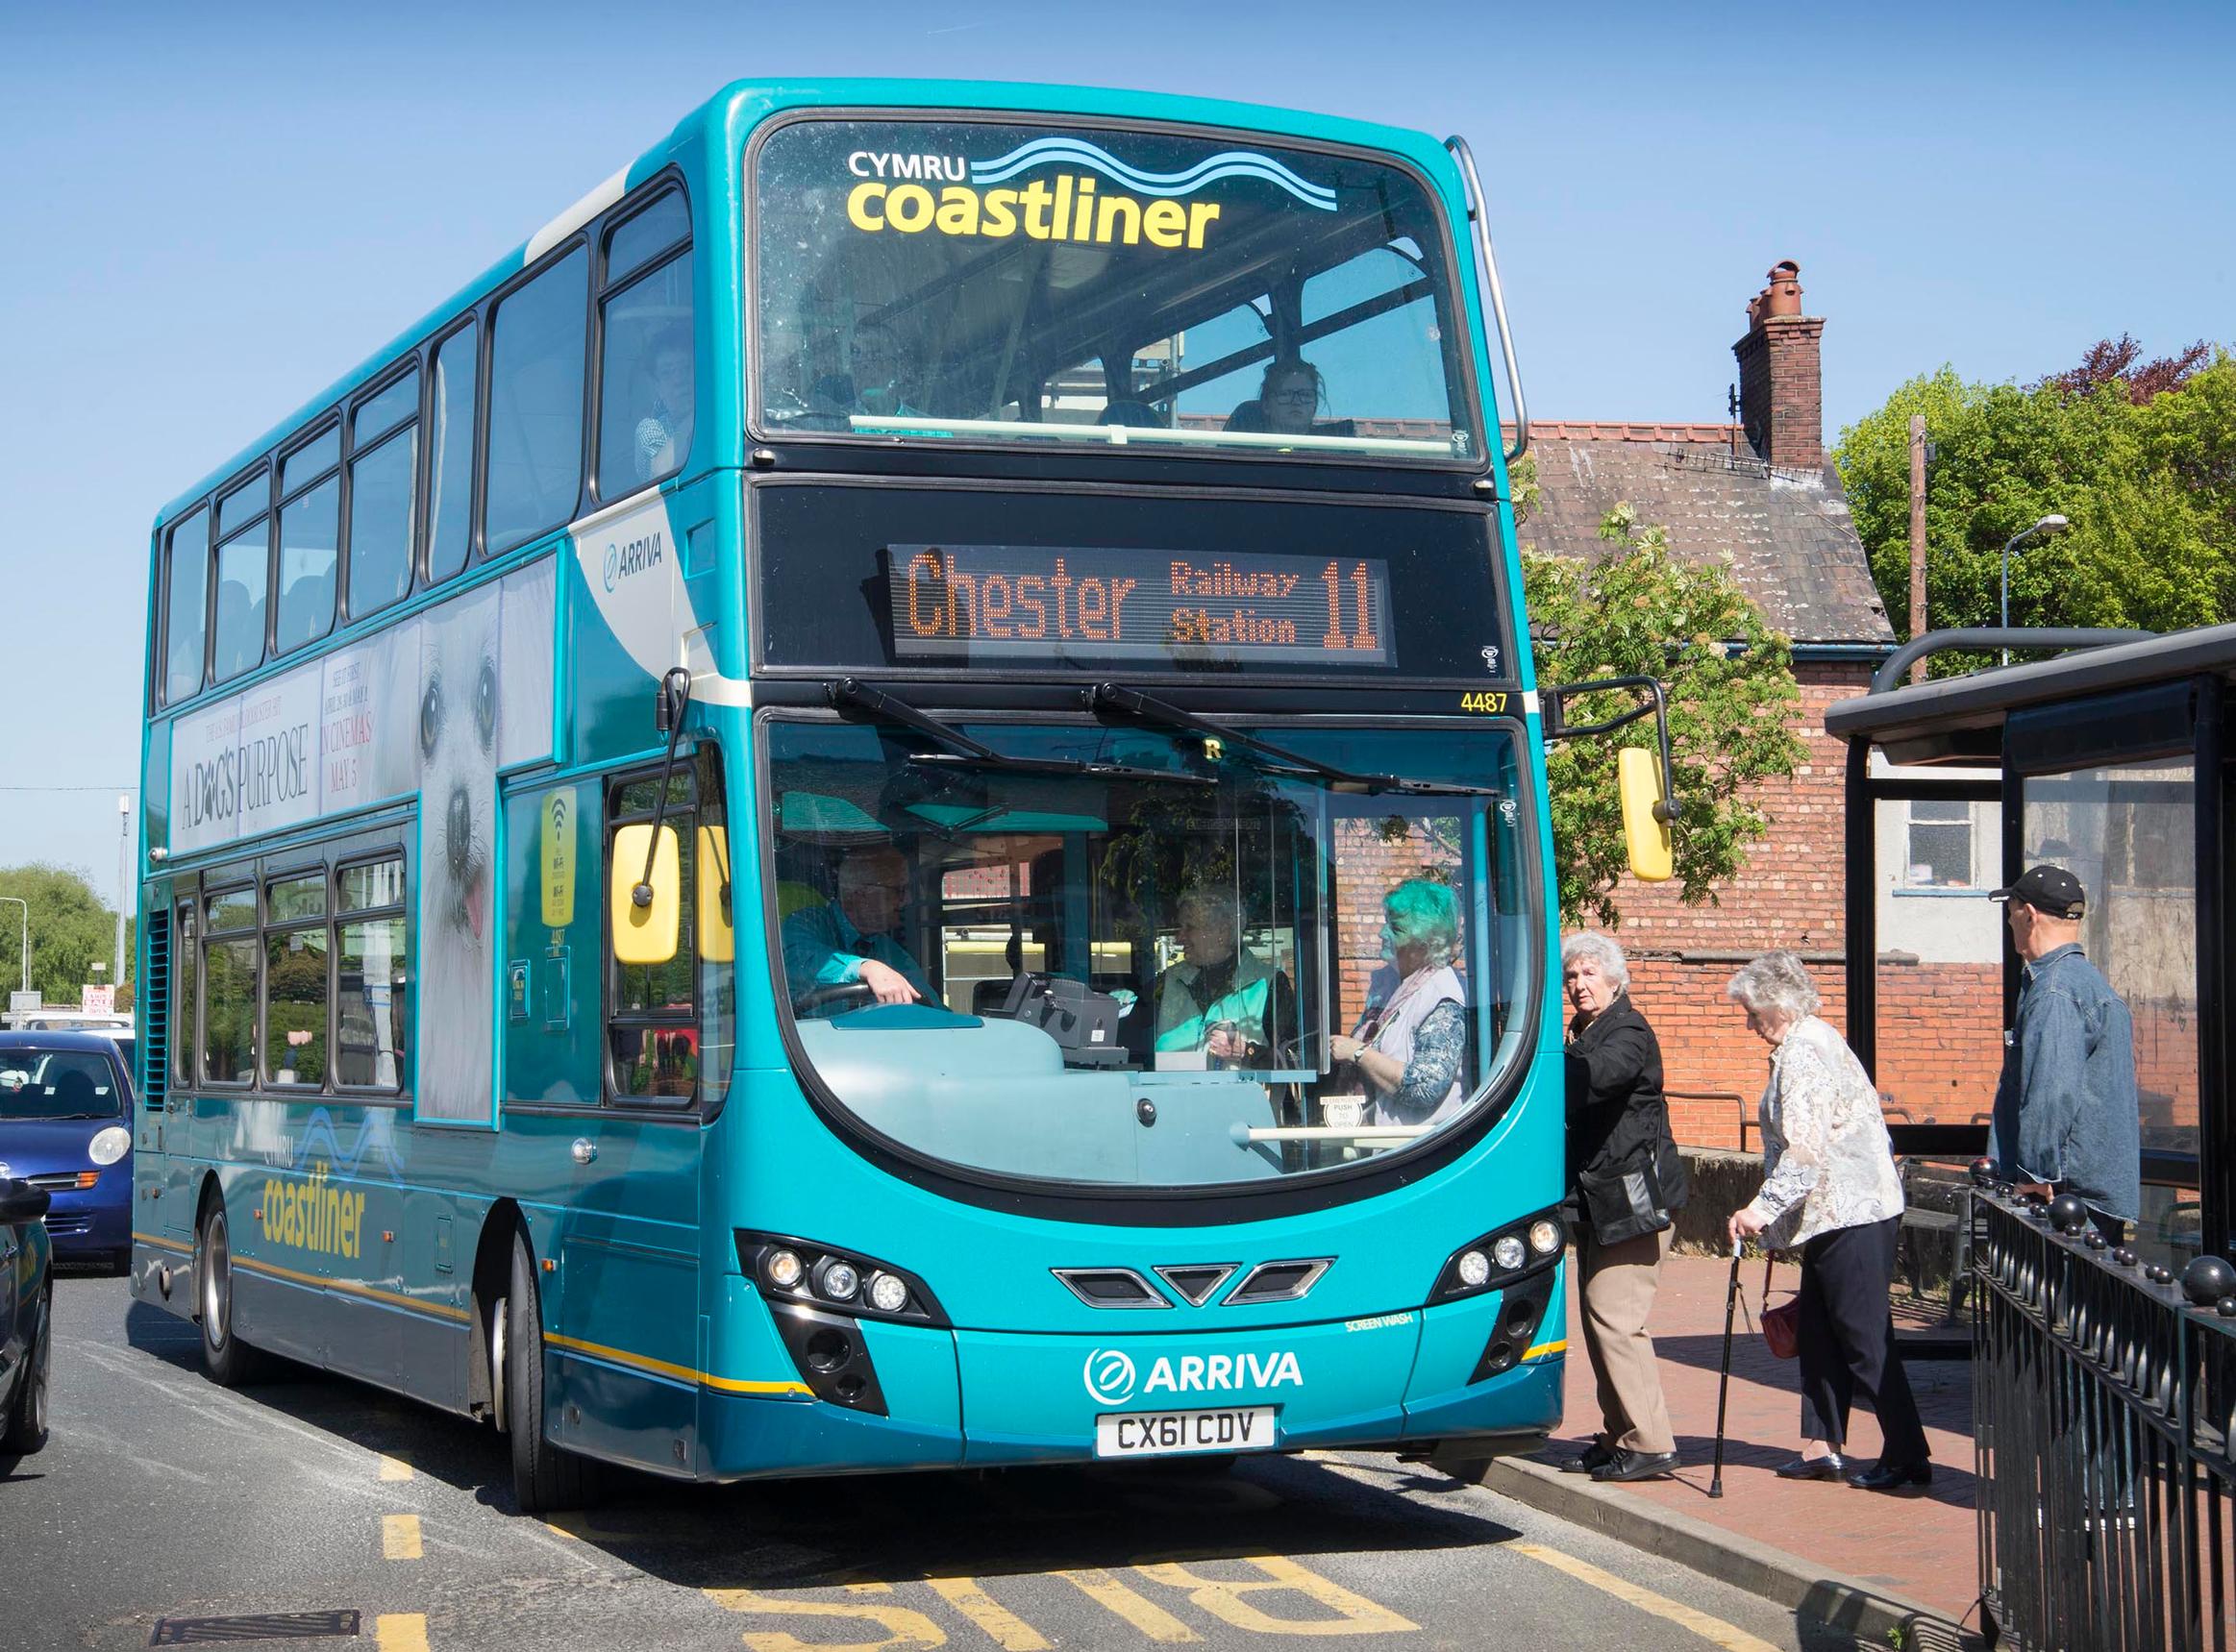 Free concessionary bus travel should be ‘reconsidered’